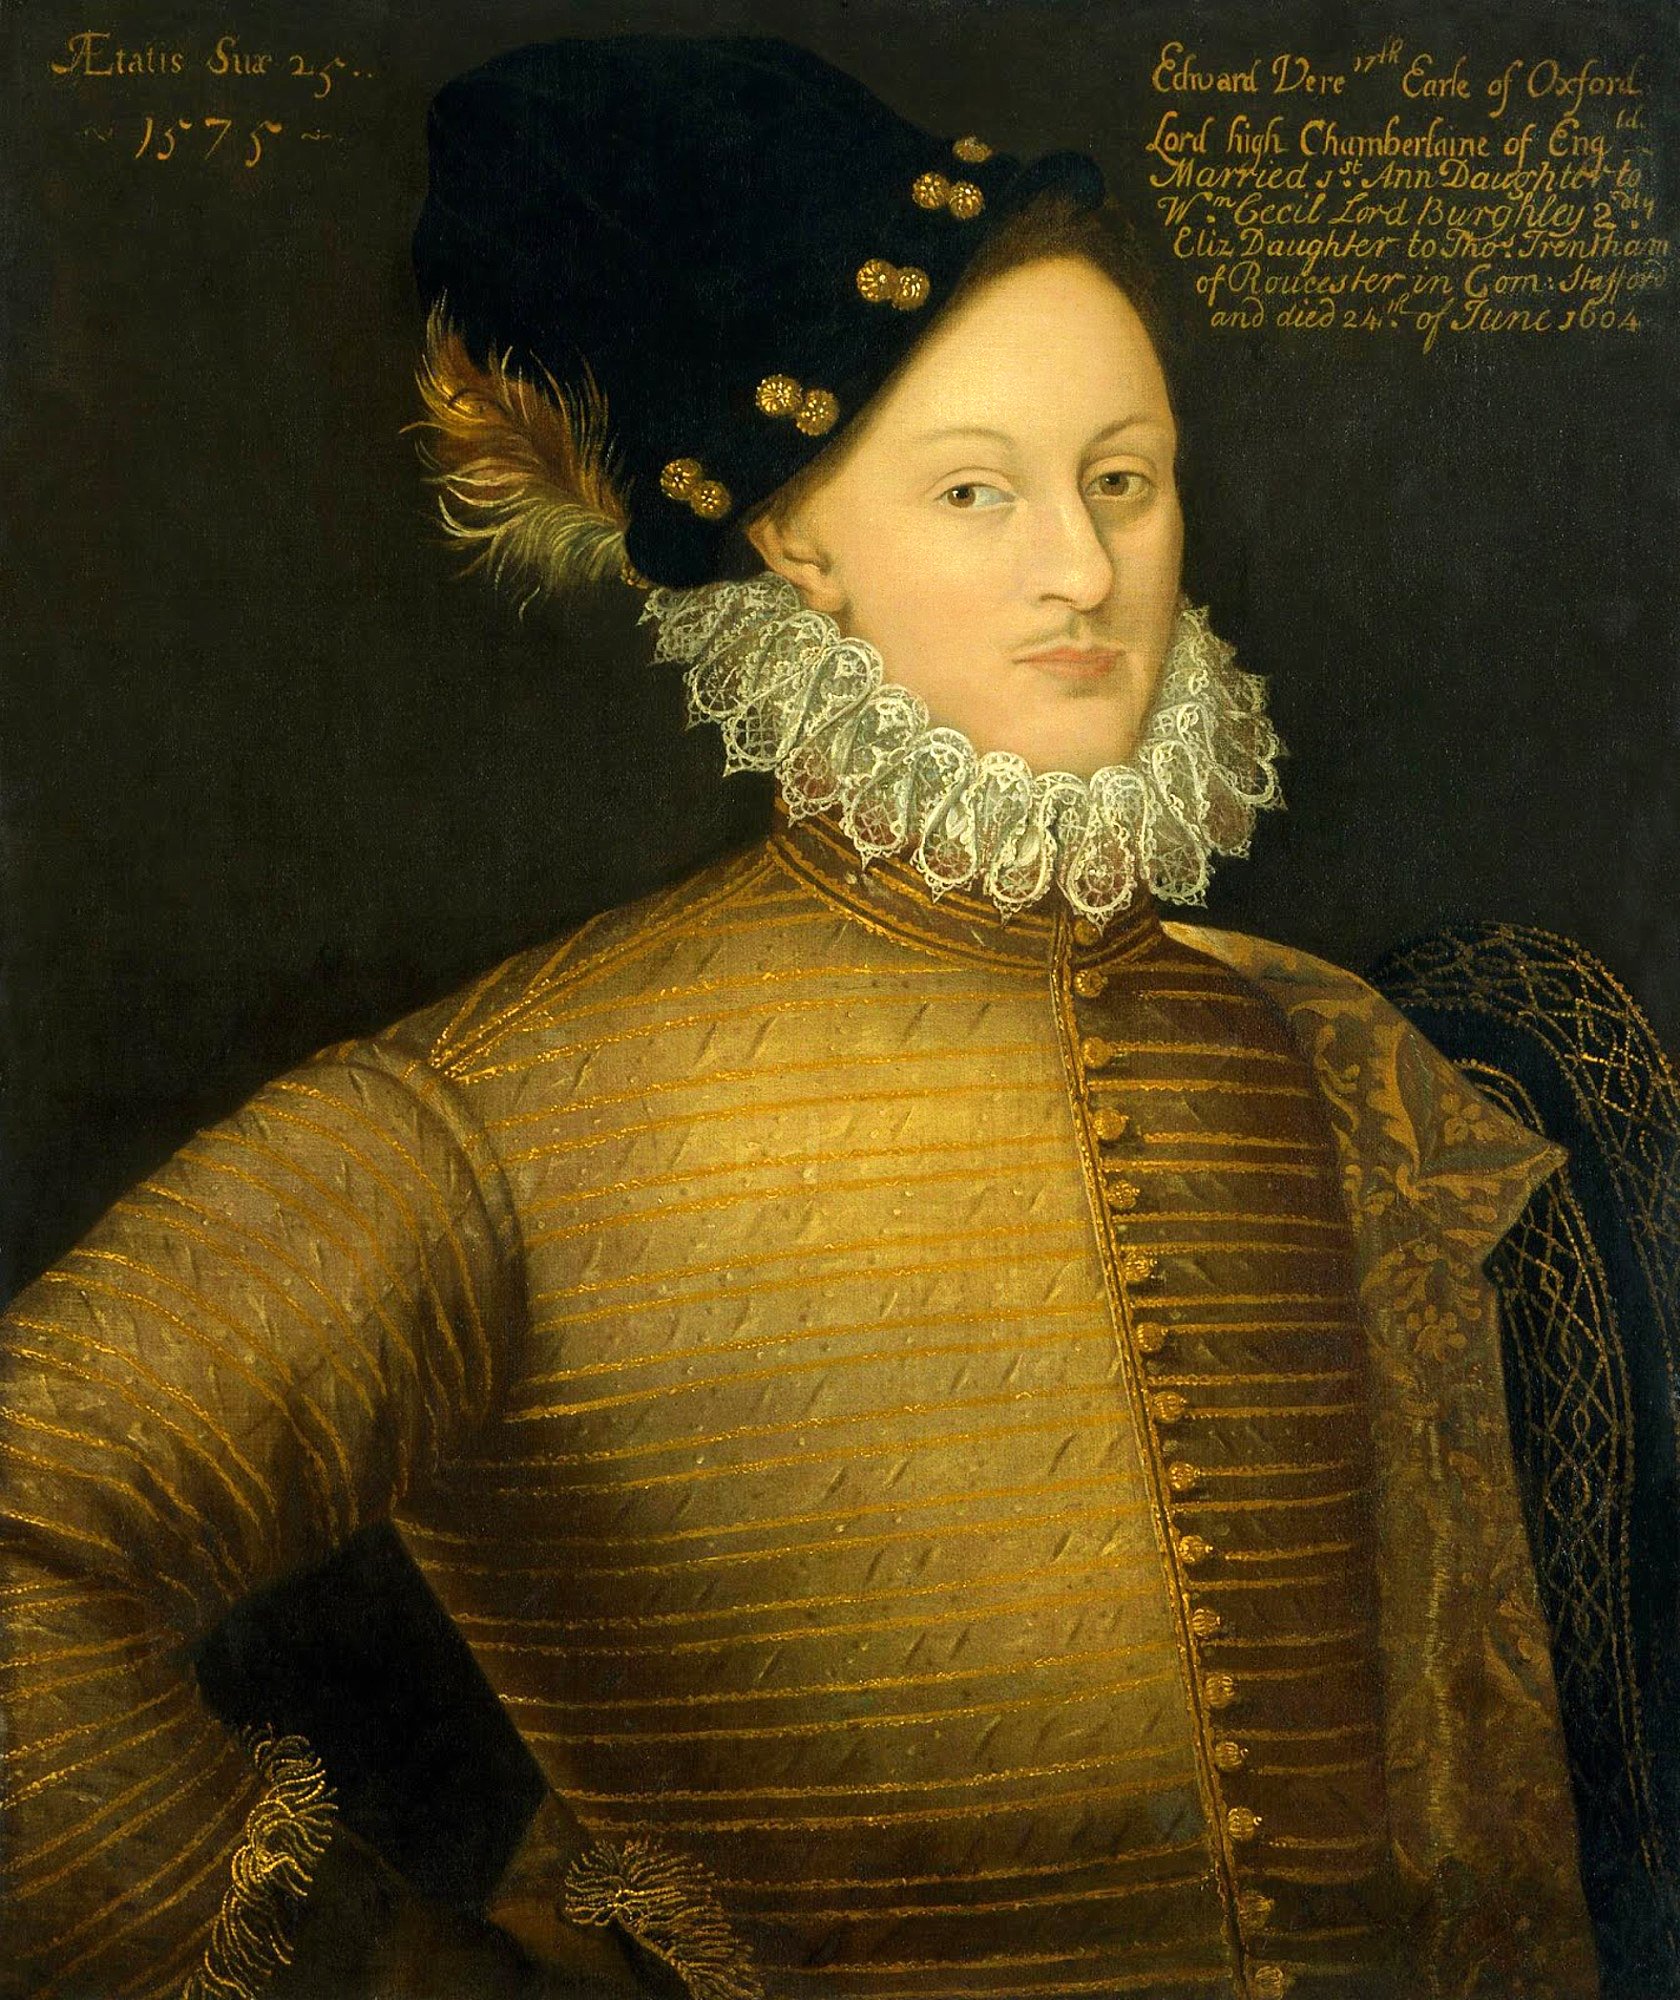 A detailed 17th-century portrait of Edward de Vere, the 17th Earl of Oxford. He appears as a young man, captured in profile with sharp features and a contemplative expression. He dons a lavish gold embroidered doublet with intricate patterns, a lace ruffled collar, and an opulent black hat adorned with golden studs and a feather. The dark background of the painting carries inscriptions detailing his titles and life events, including his role as the Lord Great Chamberlain of England, his marriage, and his death date. The painting exudes a sense of nobility and showcases the fashion and artistry of the era.